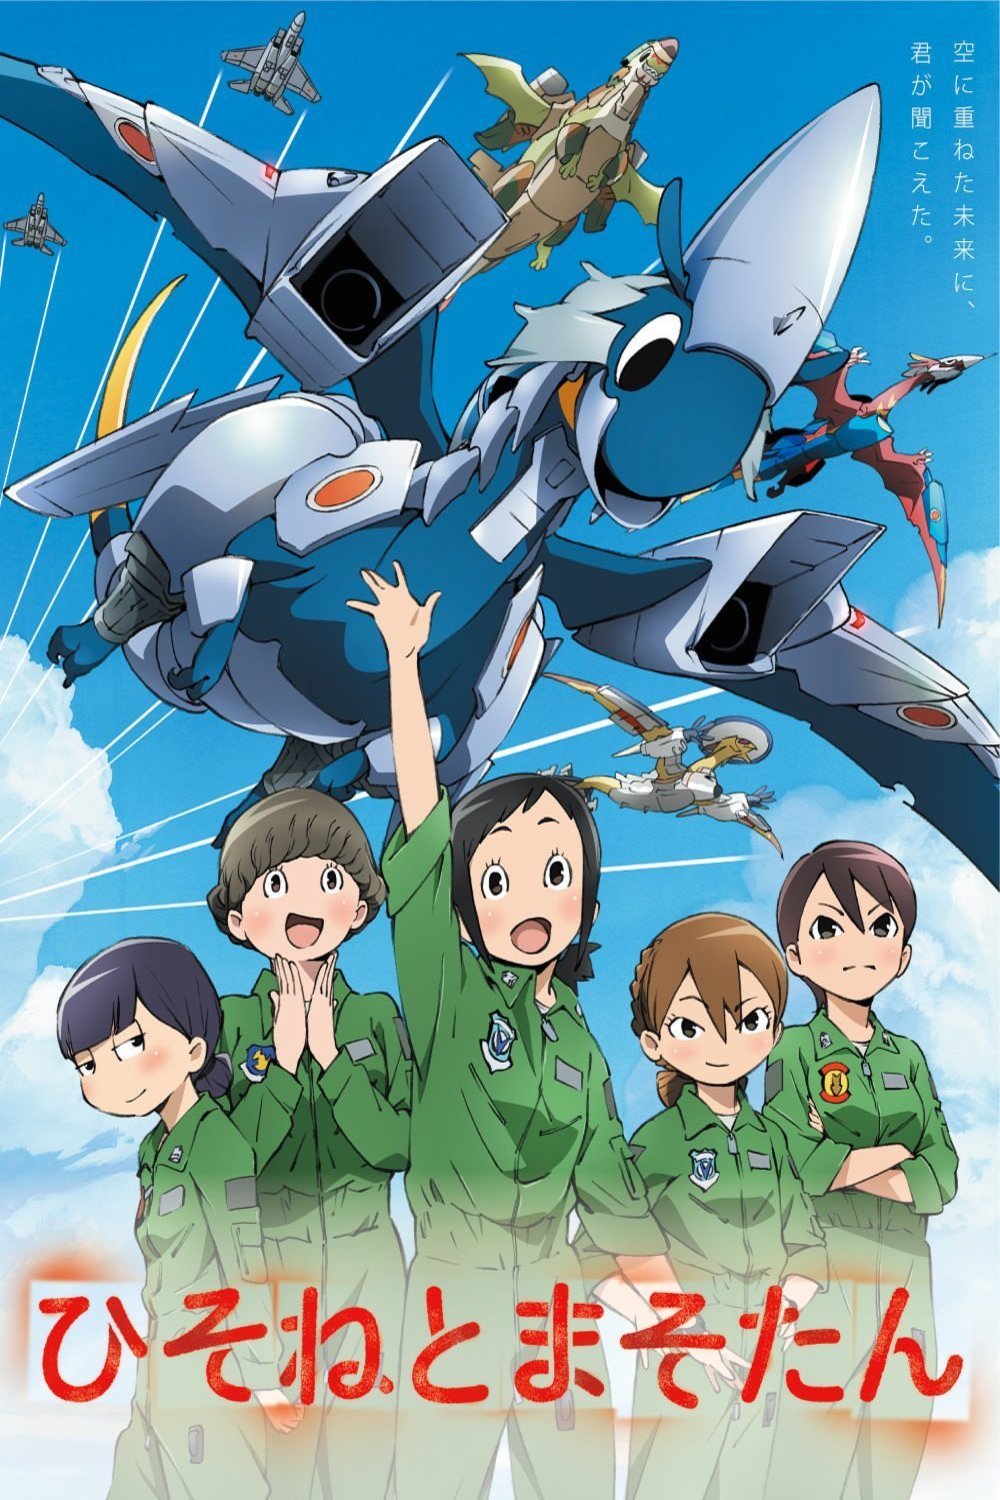 Japanese poster of the movie Dragon Pilot: Hisone and Masotan